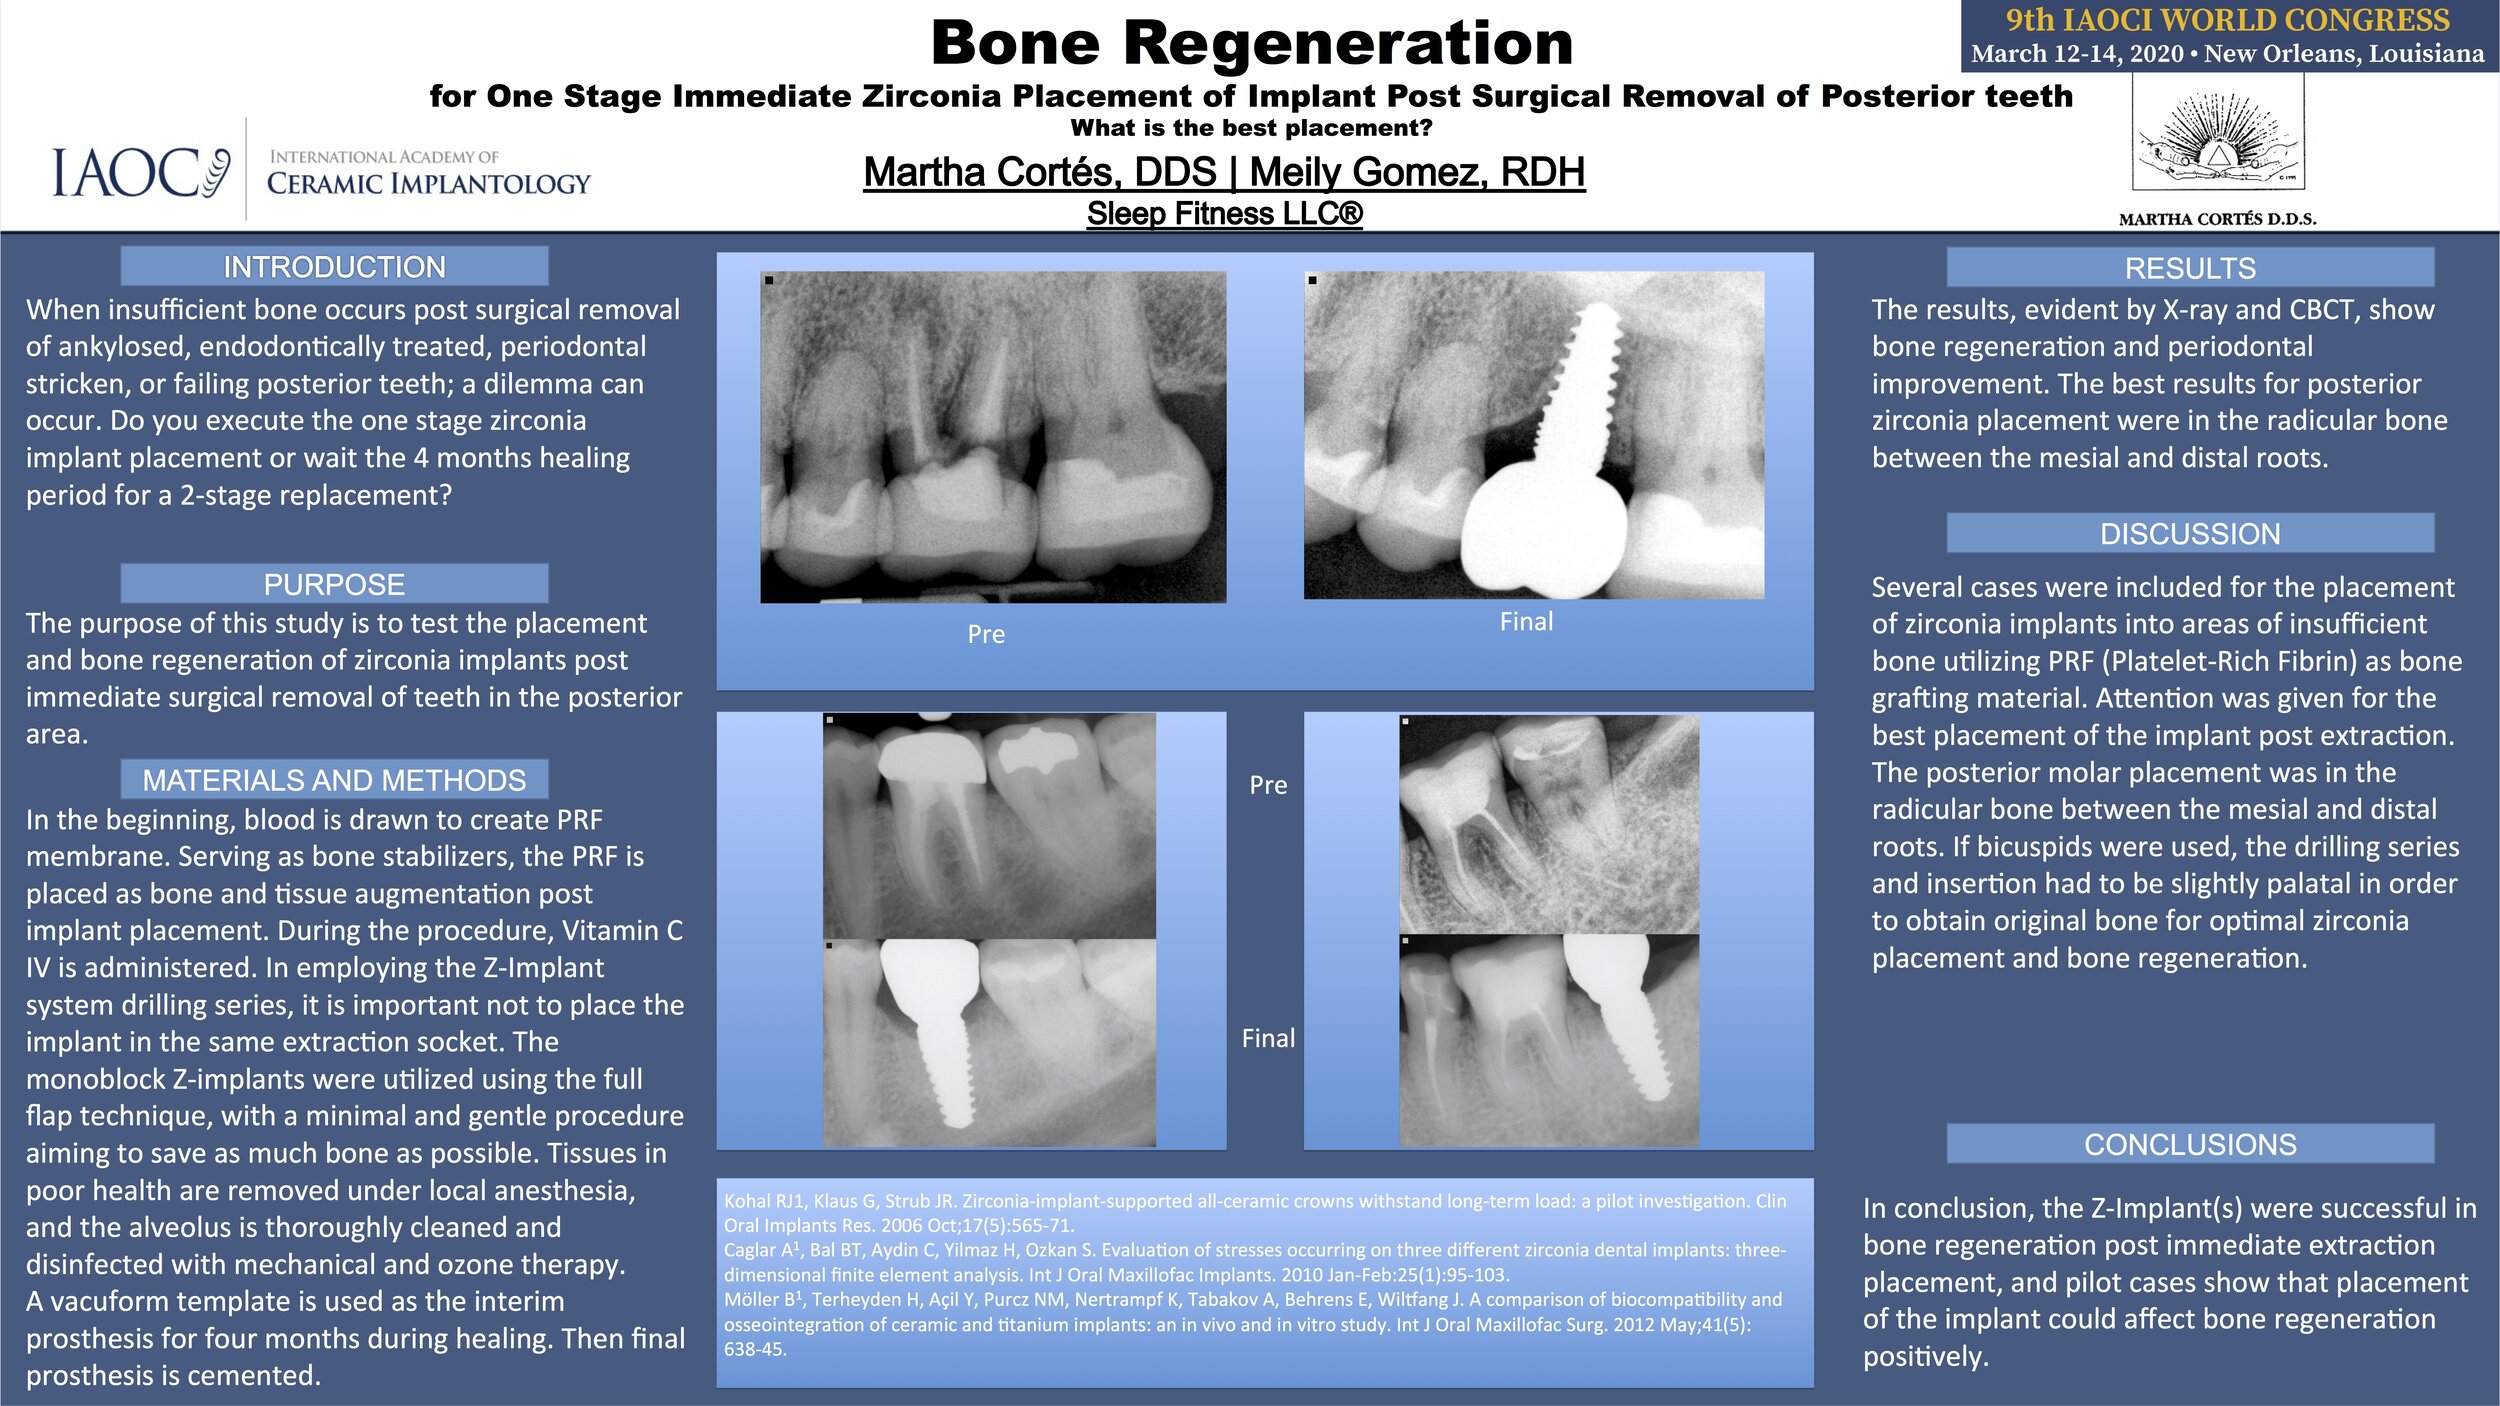  9th IAOCI World Congress Poster Presentation on Bone Regeneration for One Stage Immediate Zirconia Placement of Implant Post Surgical Removal of Posterior Teeth. 